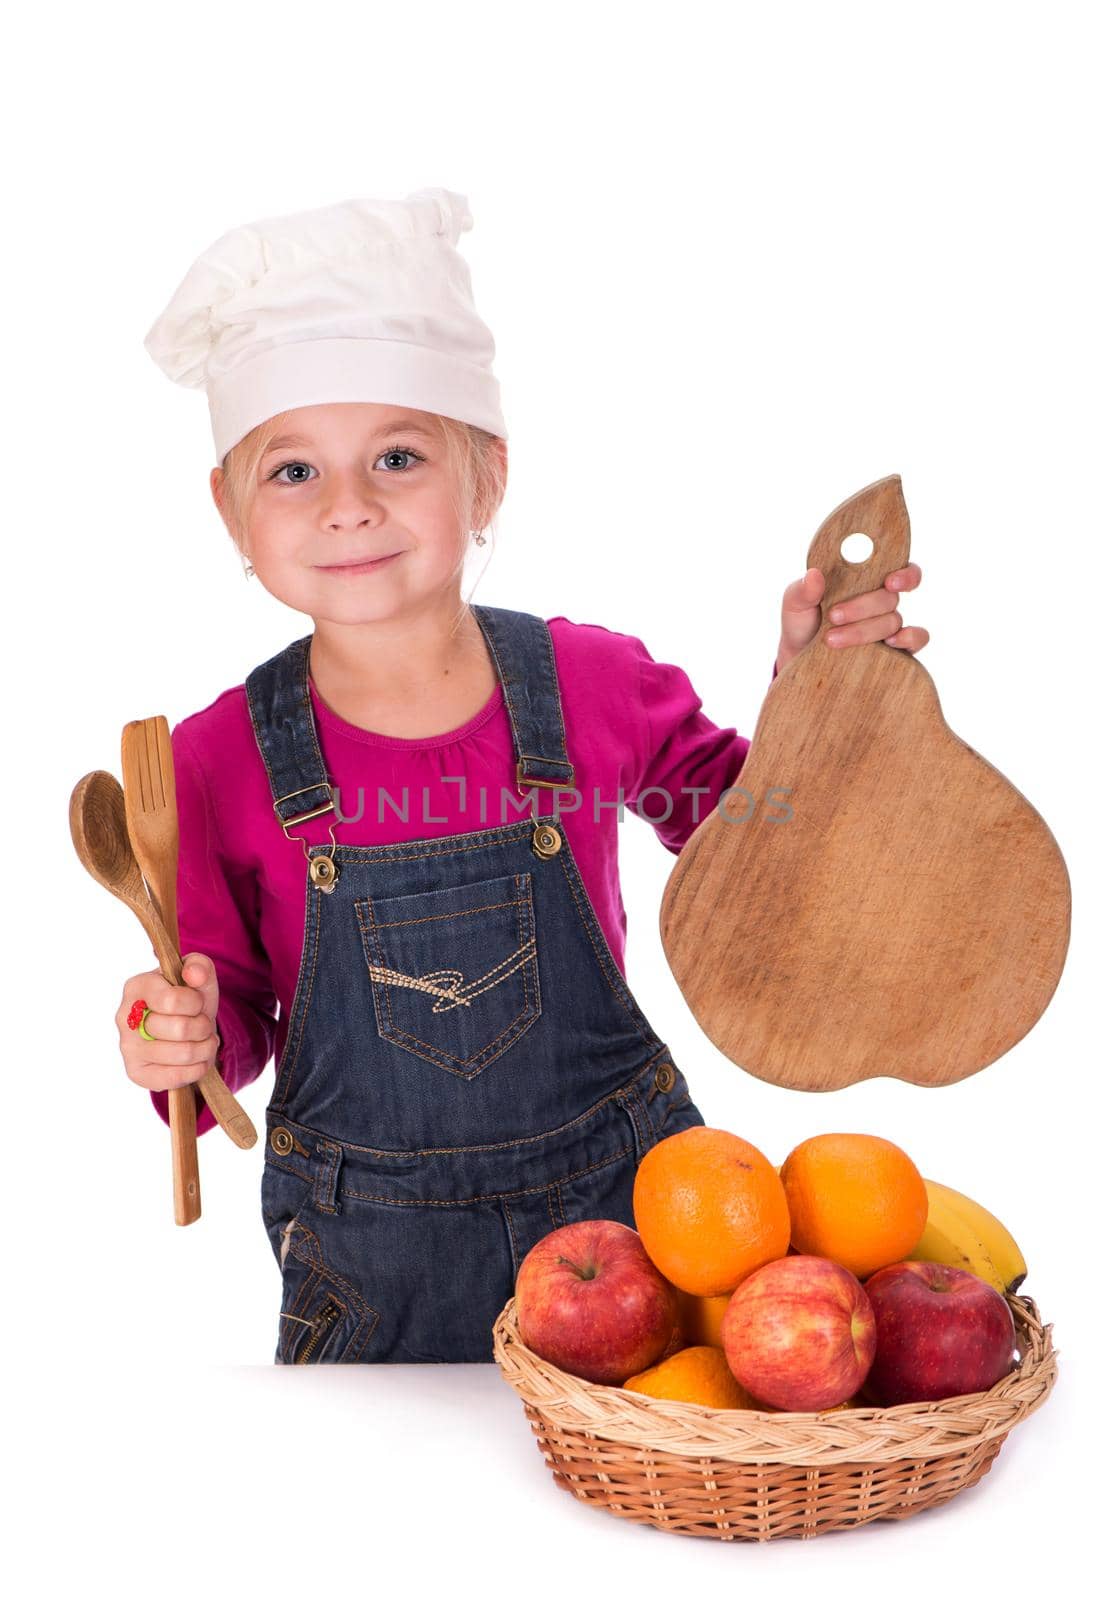 Close-up portrait of a little girl holding fruits - apples, bananas and oranges and kitchen appliances. Isolated on a light background. by aprilphoto